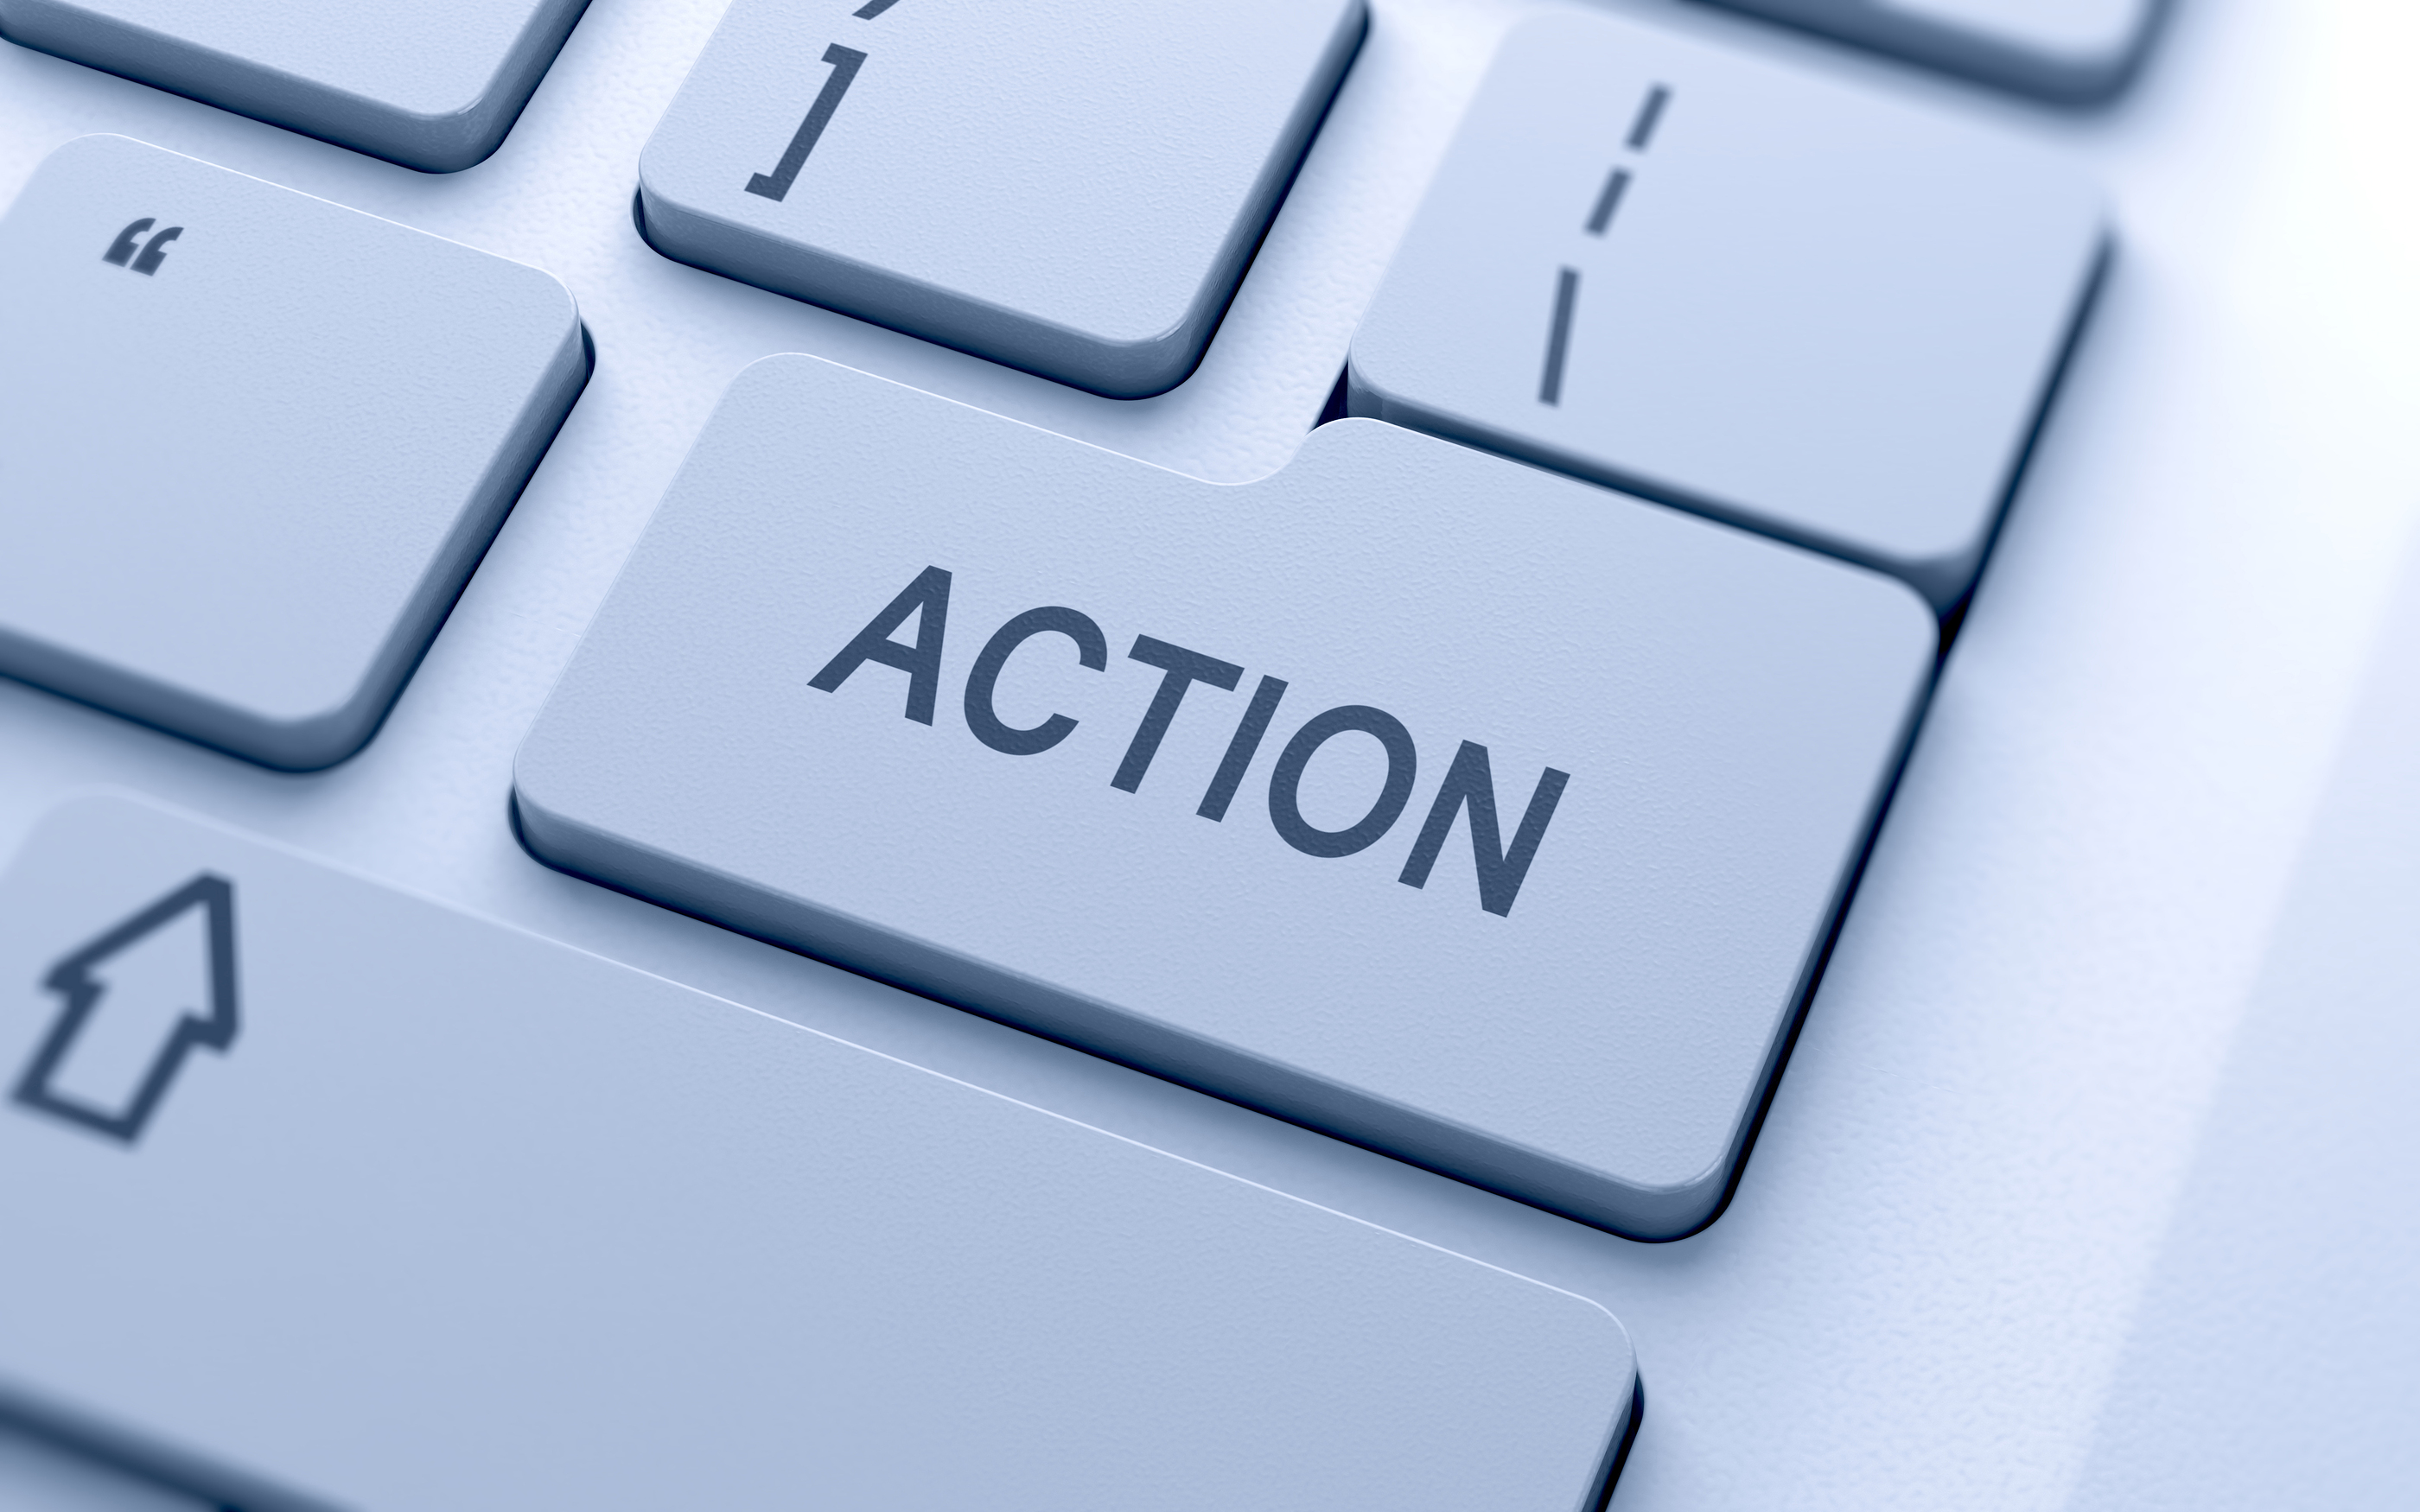 Action button on keyboard with soft focus